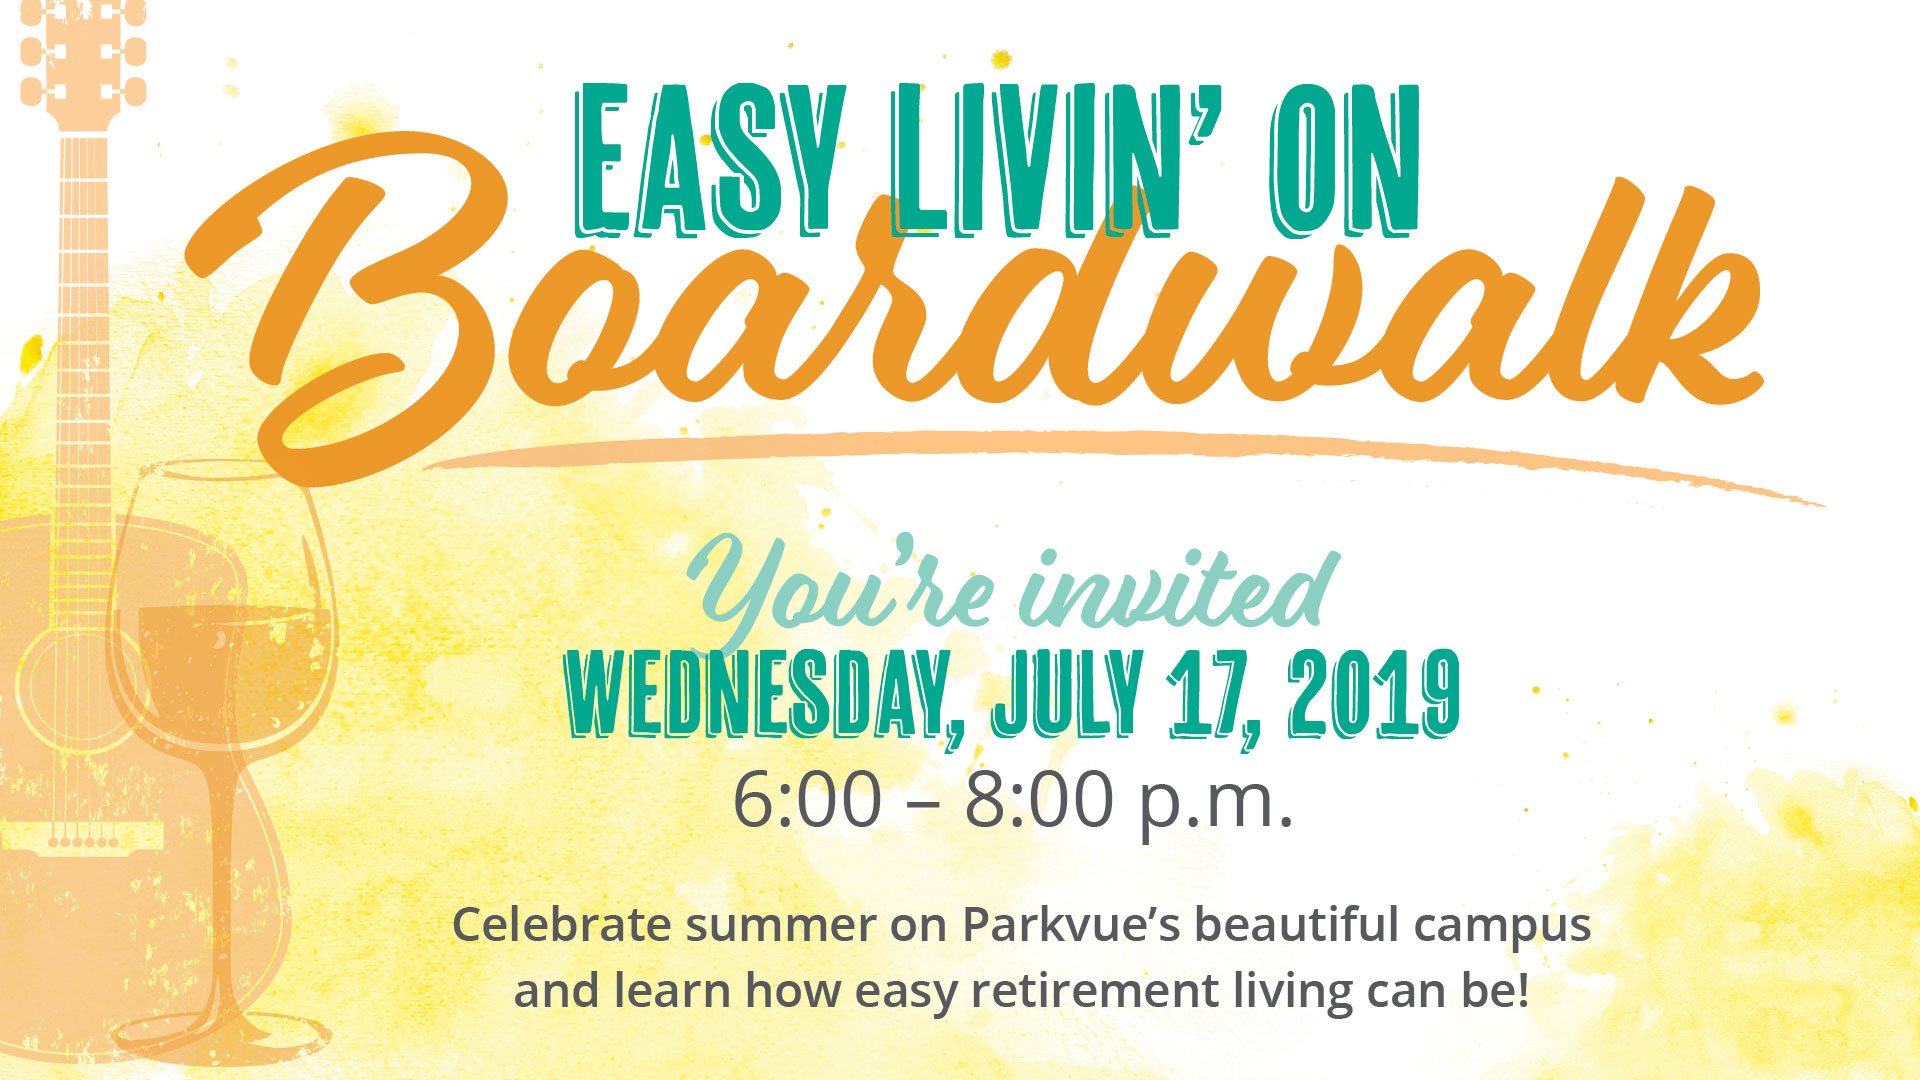 Easy Livin' on Boardwal - You're invited Wednesday, July 17, 2019 6-8pm